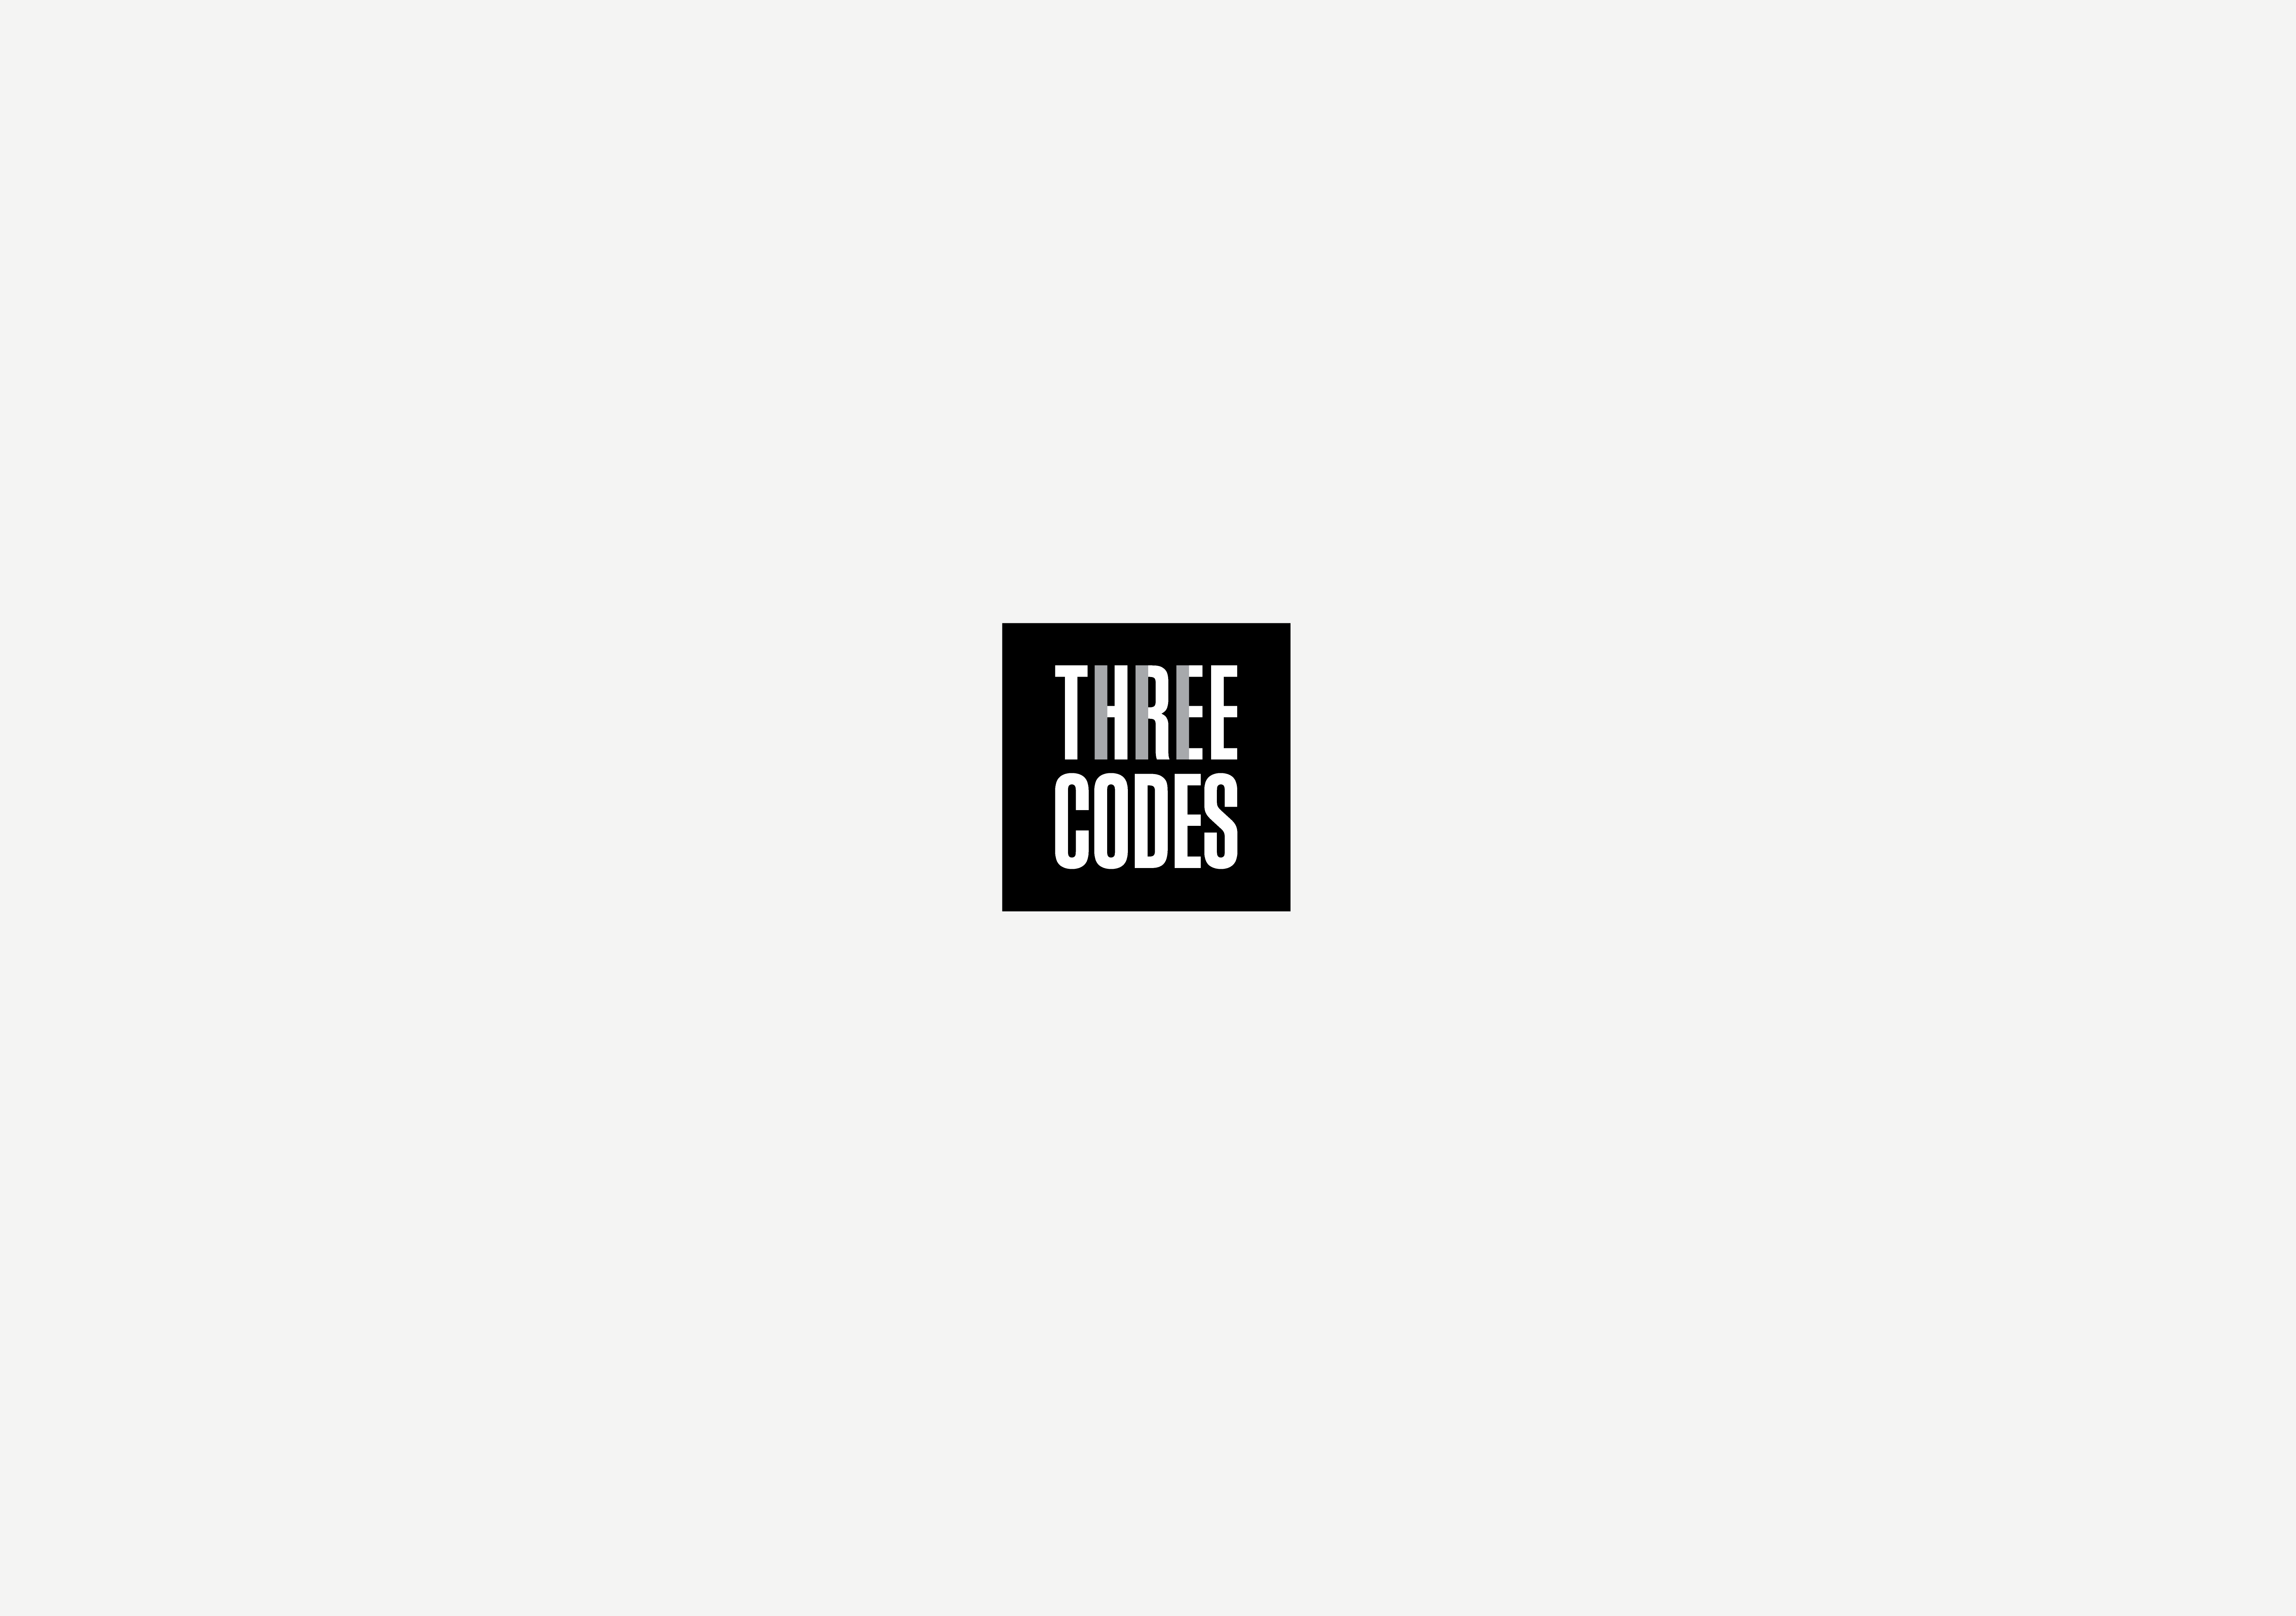 Branding for Three Codes, an electrical company by Ottawa Graphic Designer idApostle